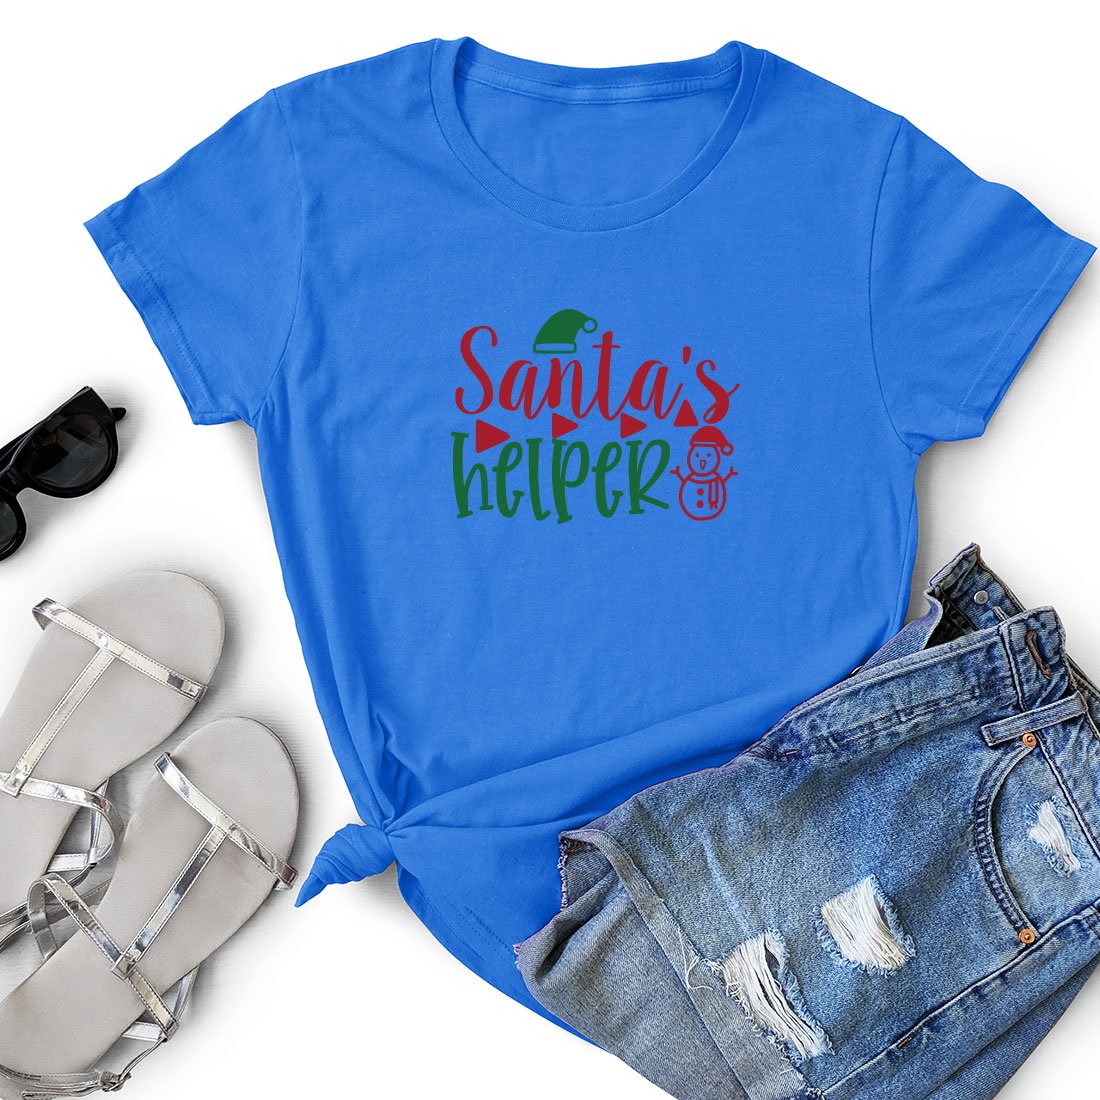 T - shirt that says santa's helper next to a pair of.